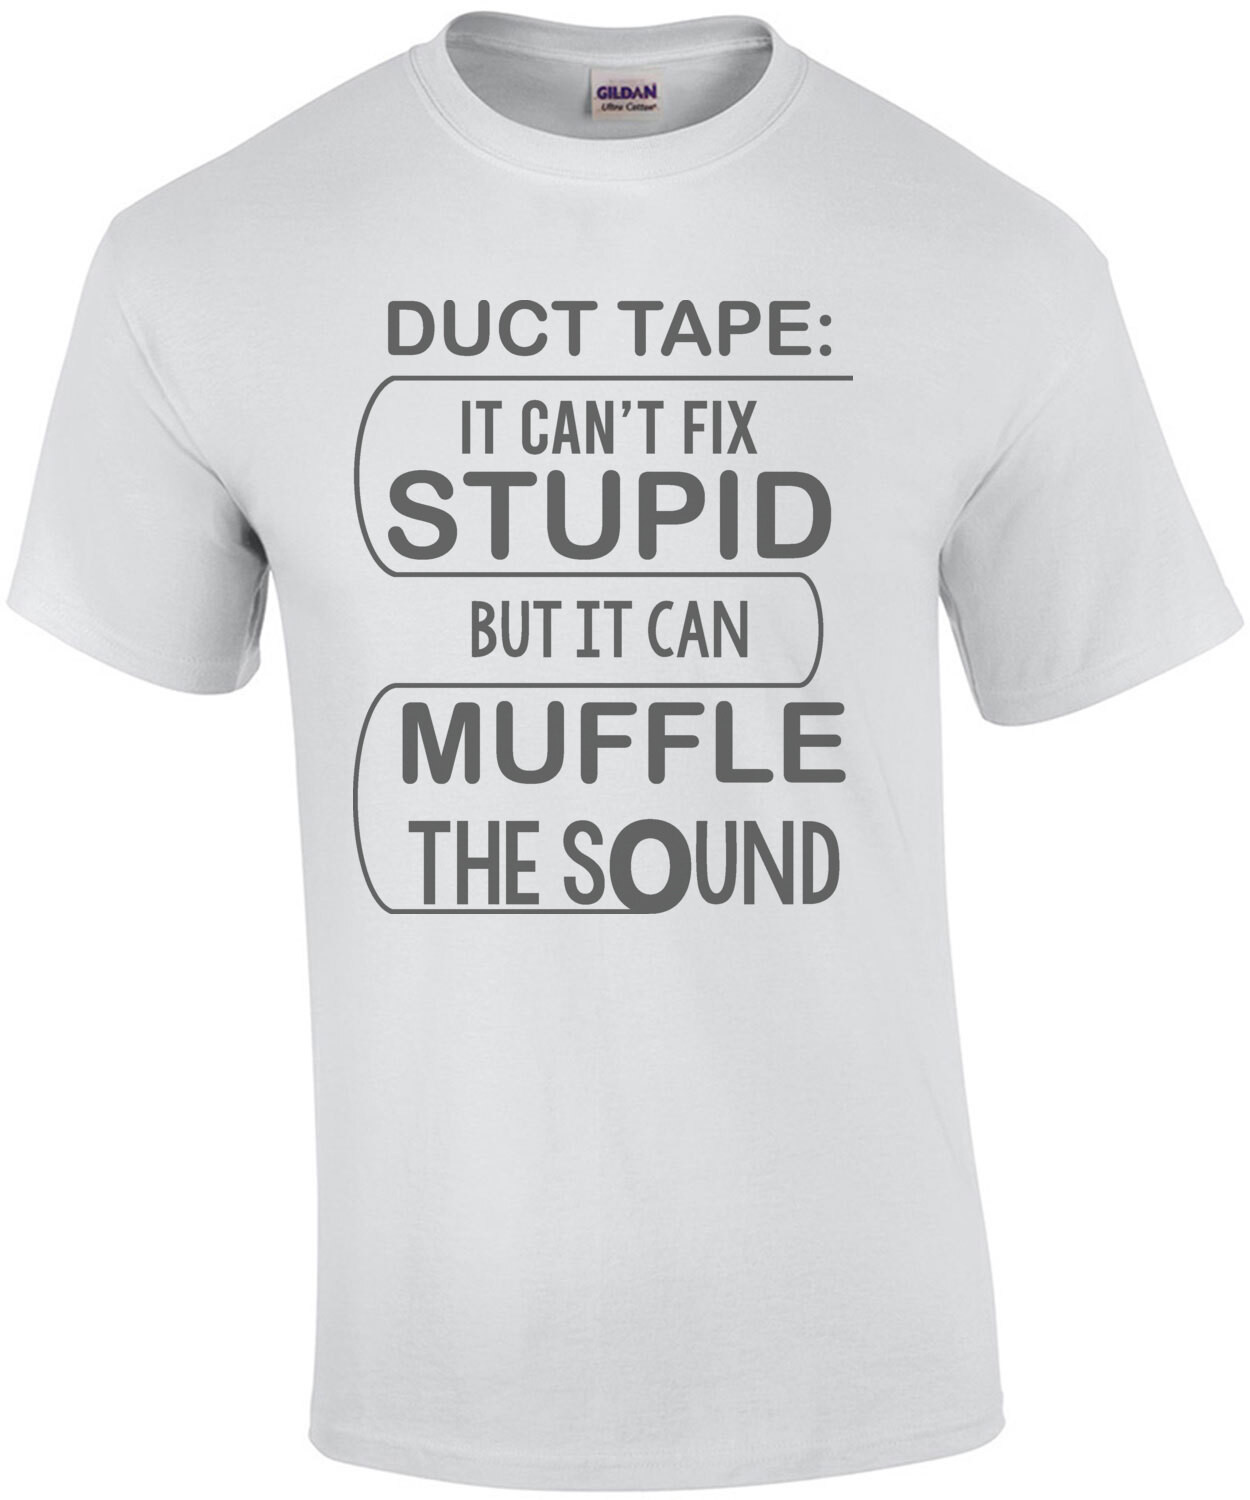 Duct Tape: It can't fix stupid but it can muffle the sound - funny t-shirt